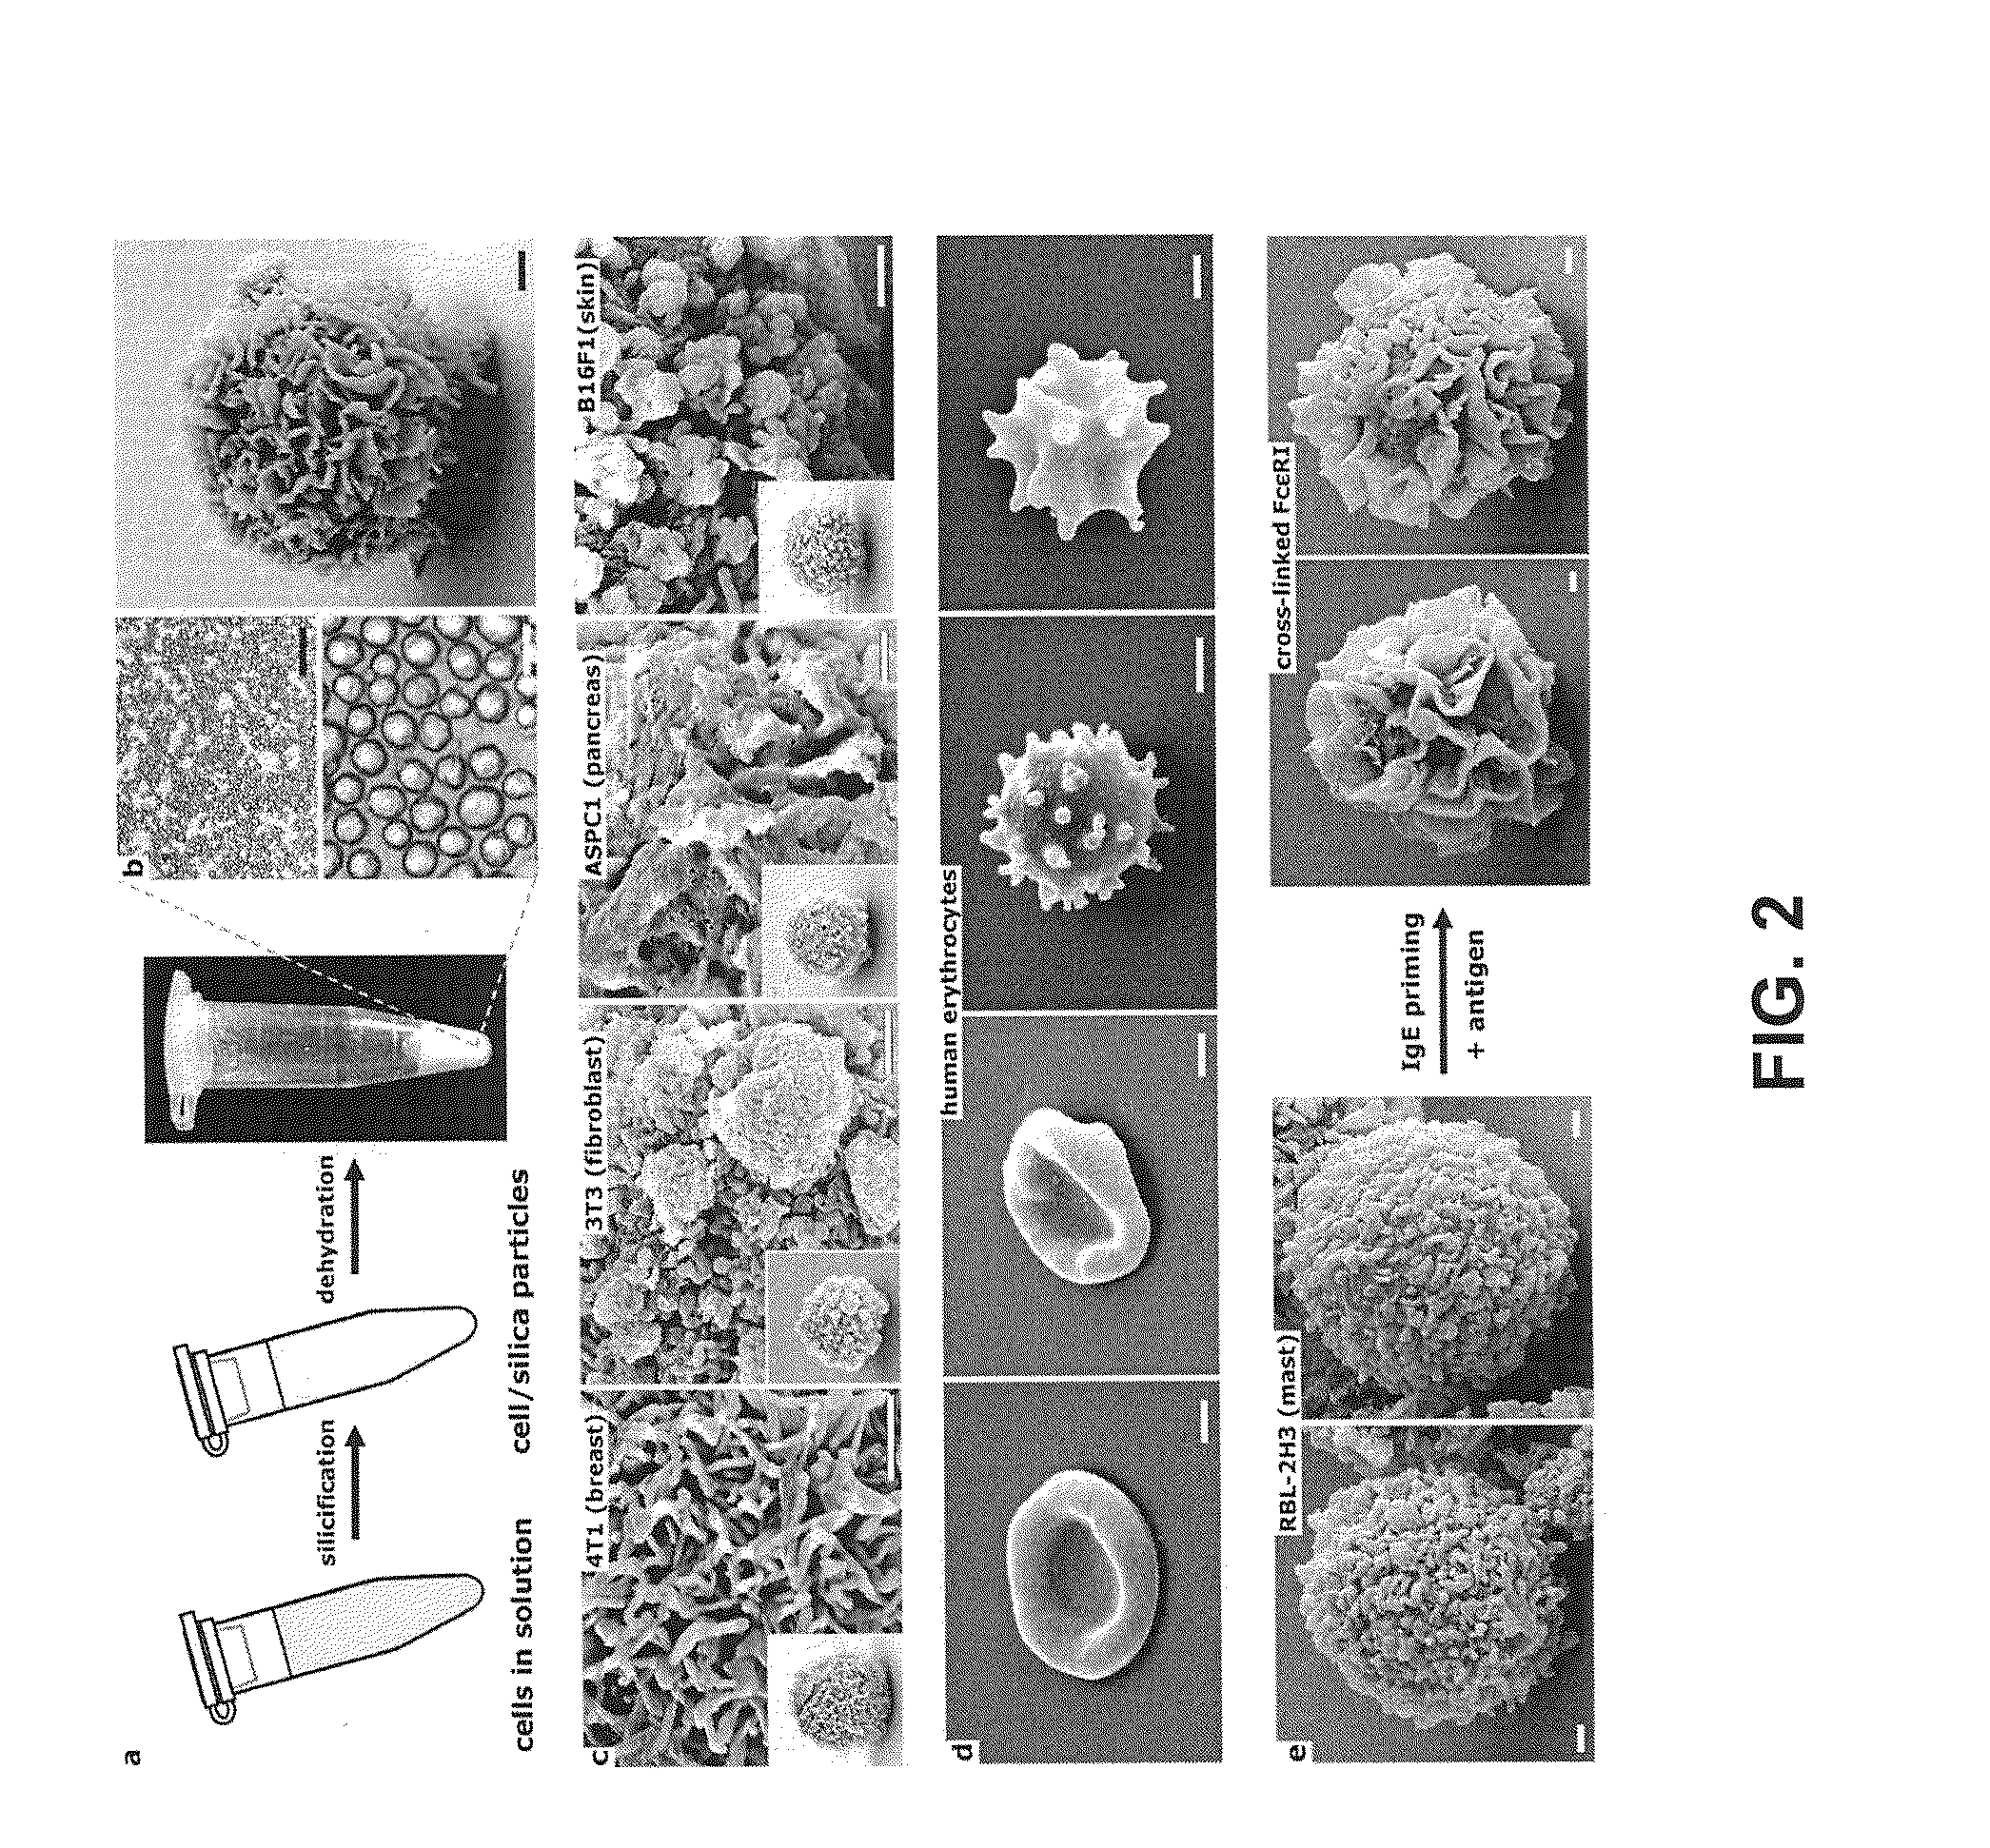 Cell-Based Composite Materials with Programmed Structures and Functions